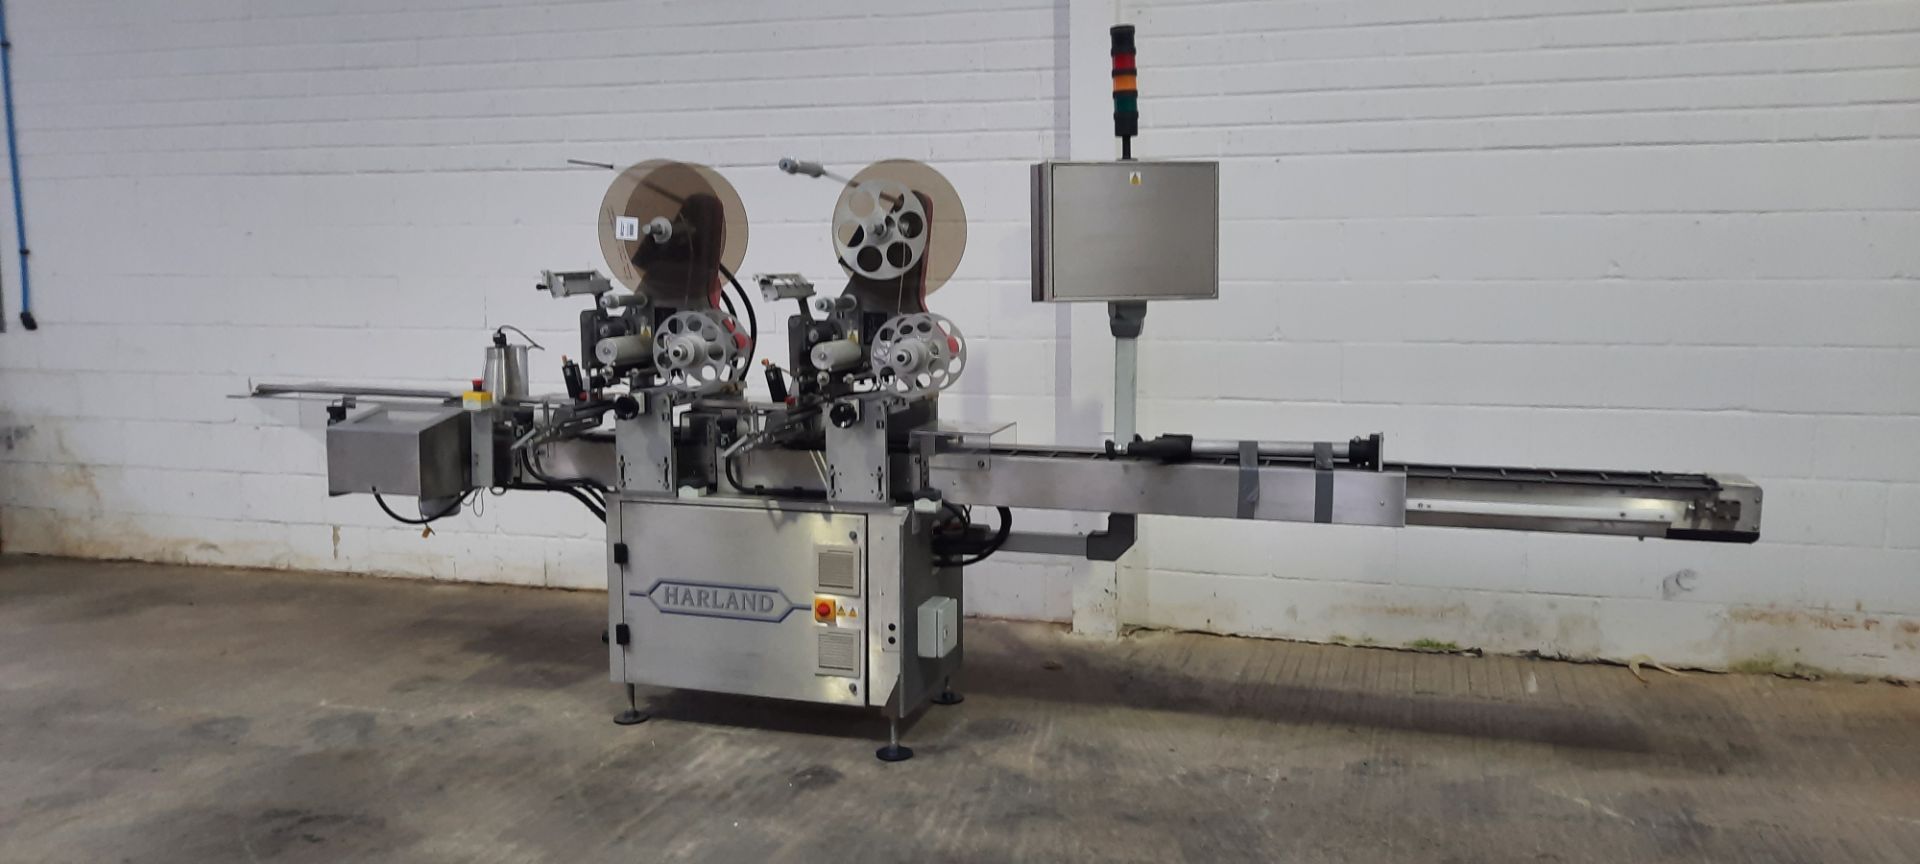 Harland Labeller MK 5 Sirius Automatic 2-Head Top Label Applicator - Image 5 of 10